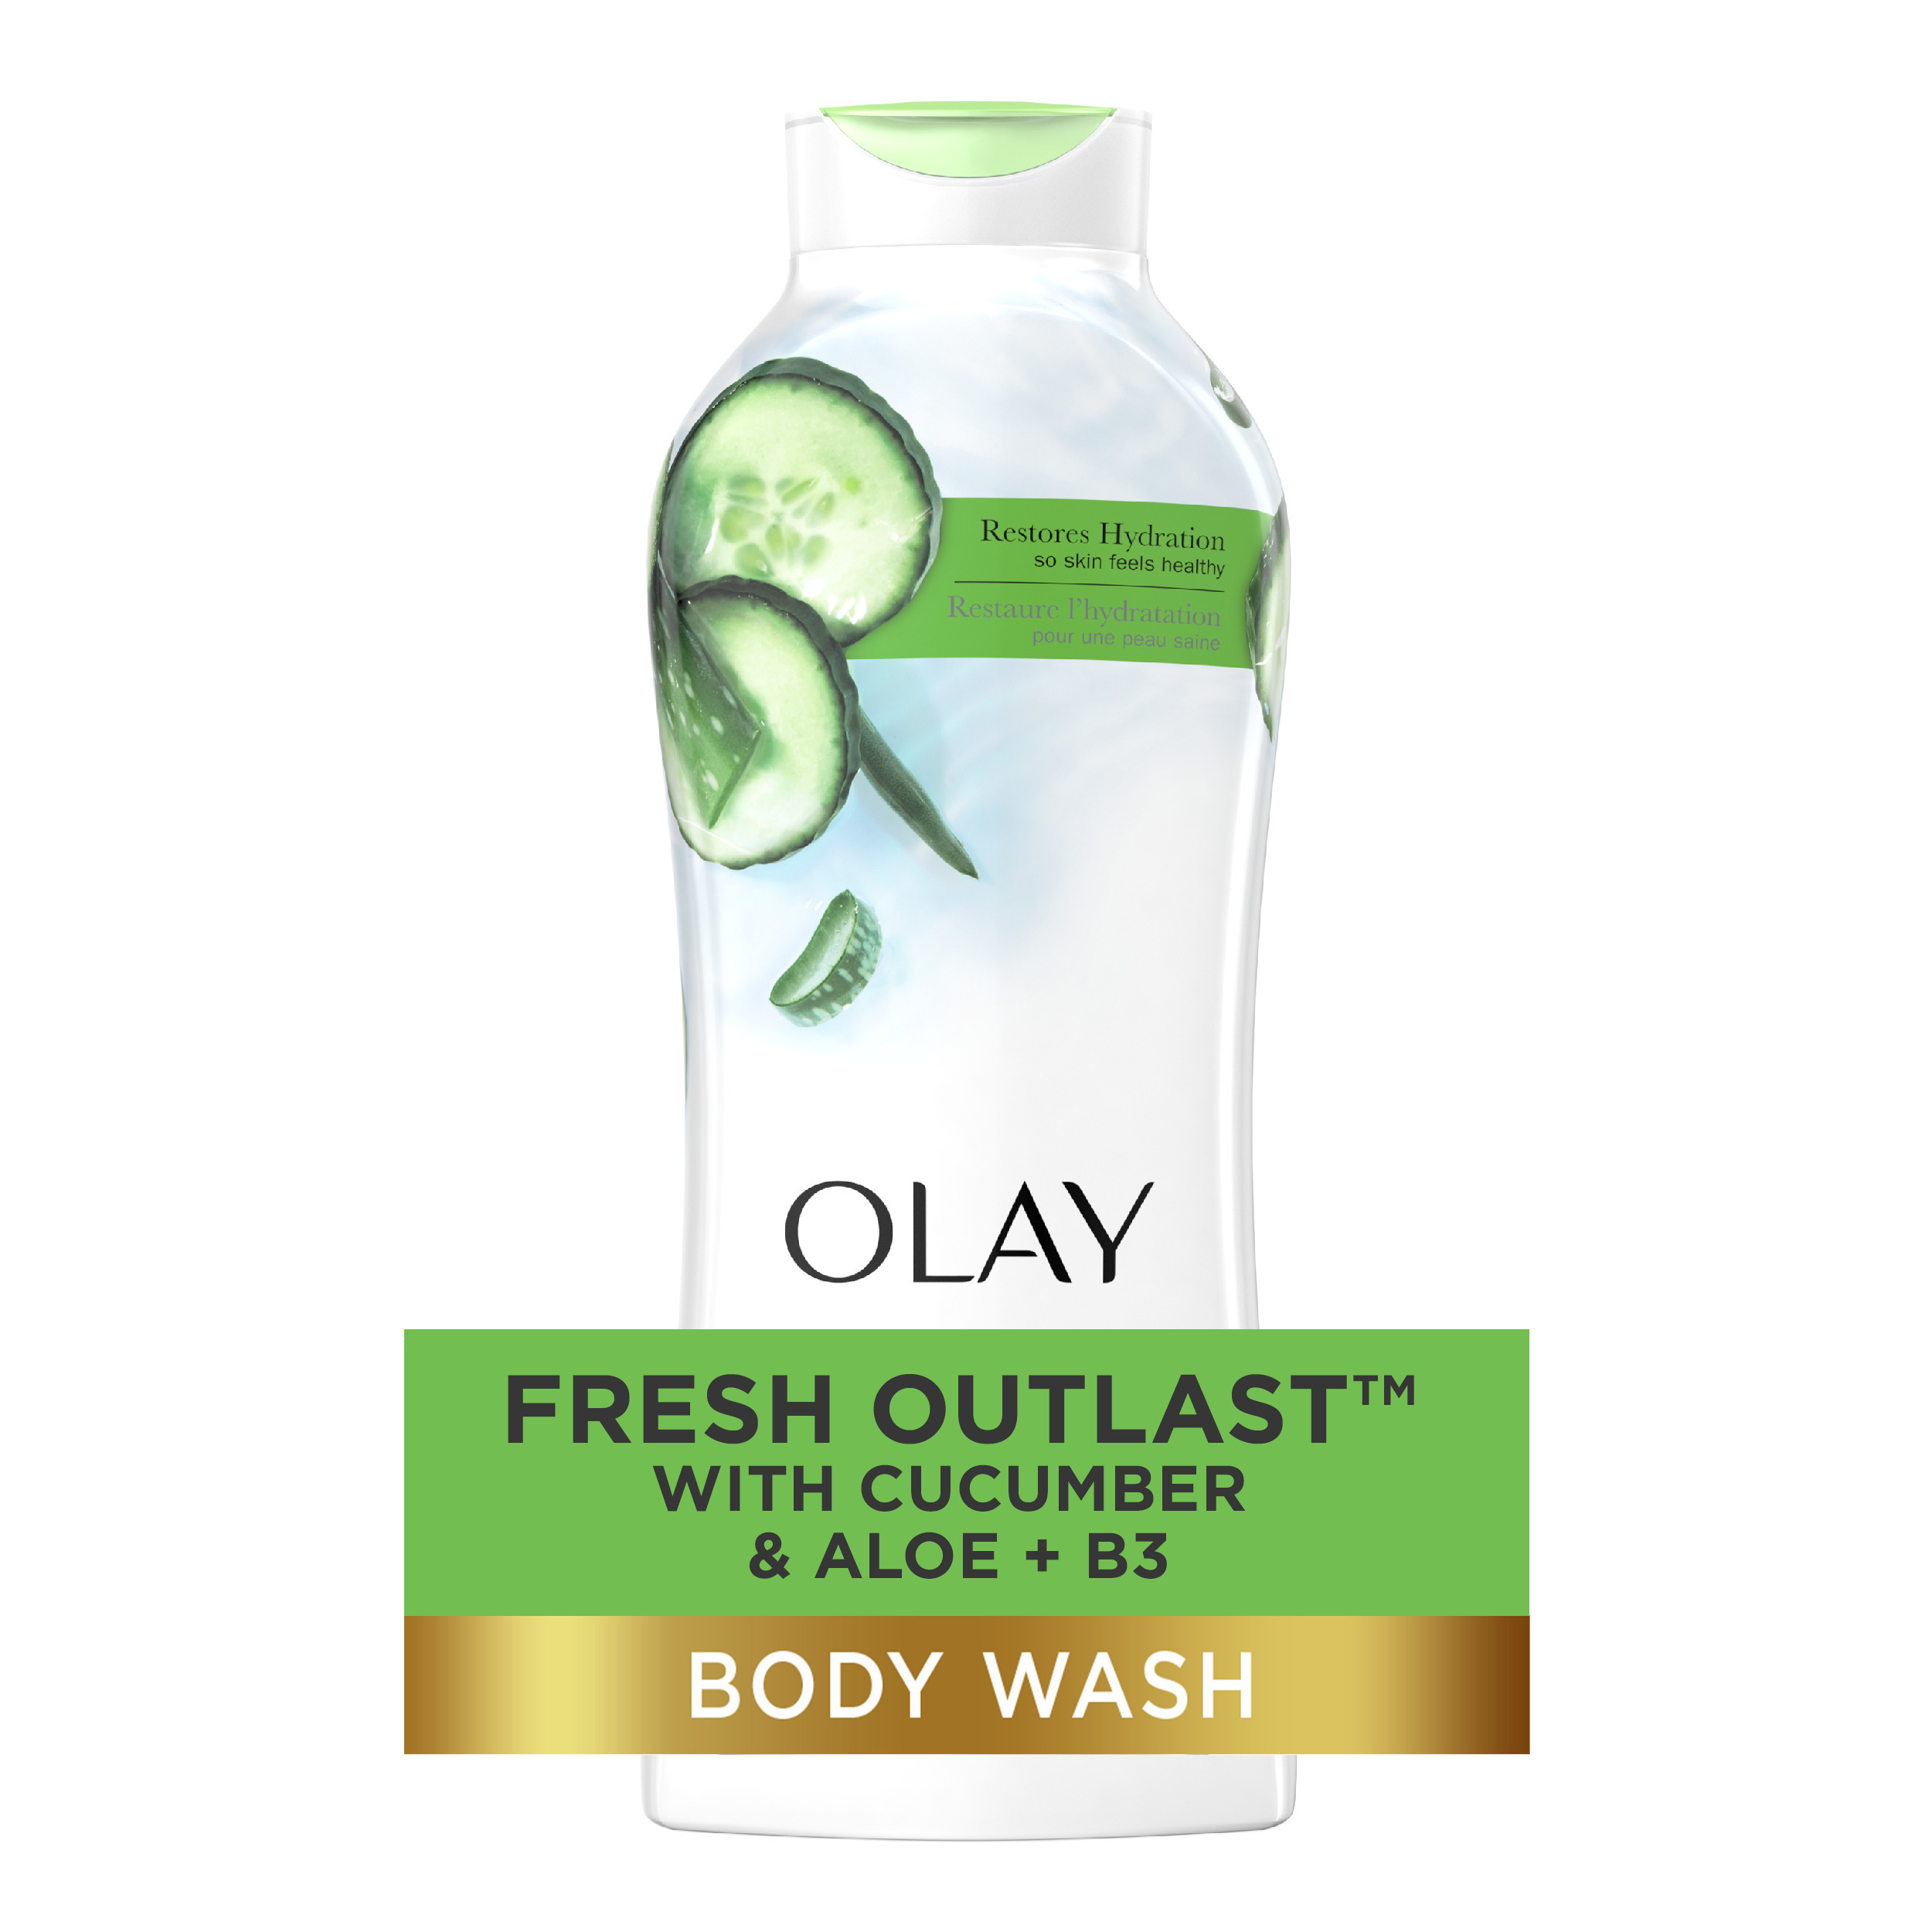 Olay Fresh Outlast Body Wash with Notes of Cucumber and Aloe, 22 fl oz - image 1 of 11